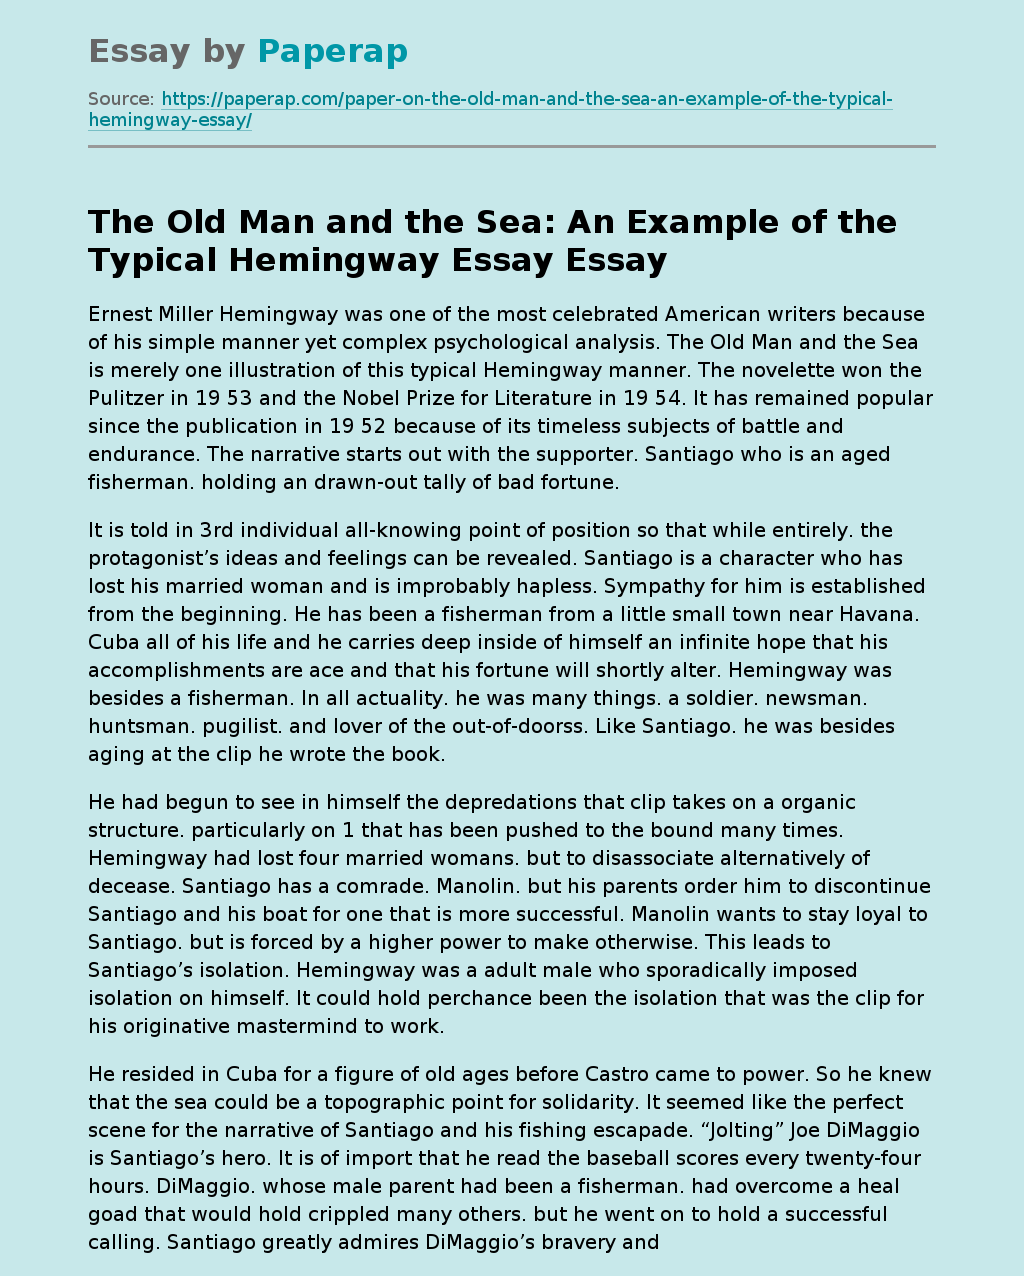 The Old Man and the Sea: An Example of the Typical Hemingway Essay